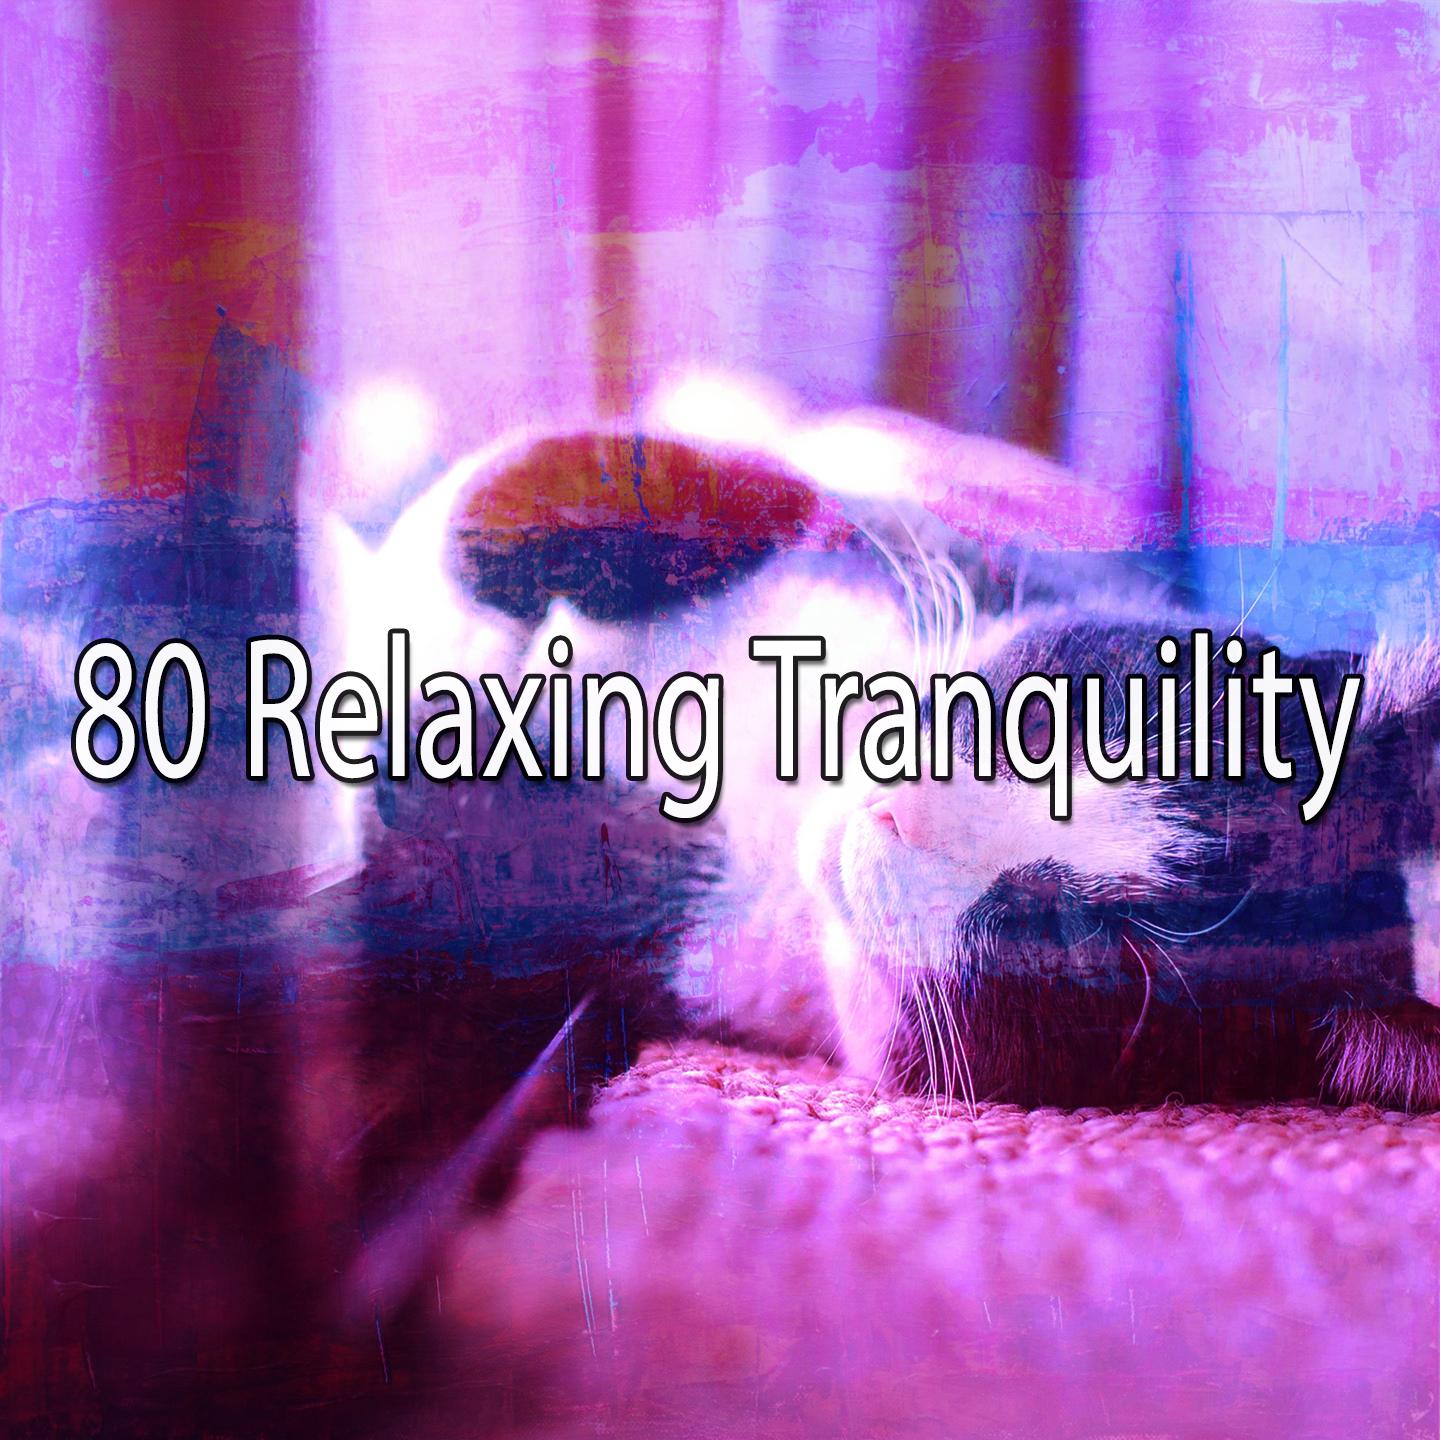 80 Relaxing Tranquility